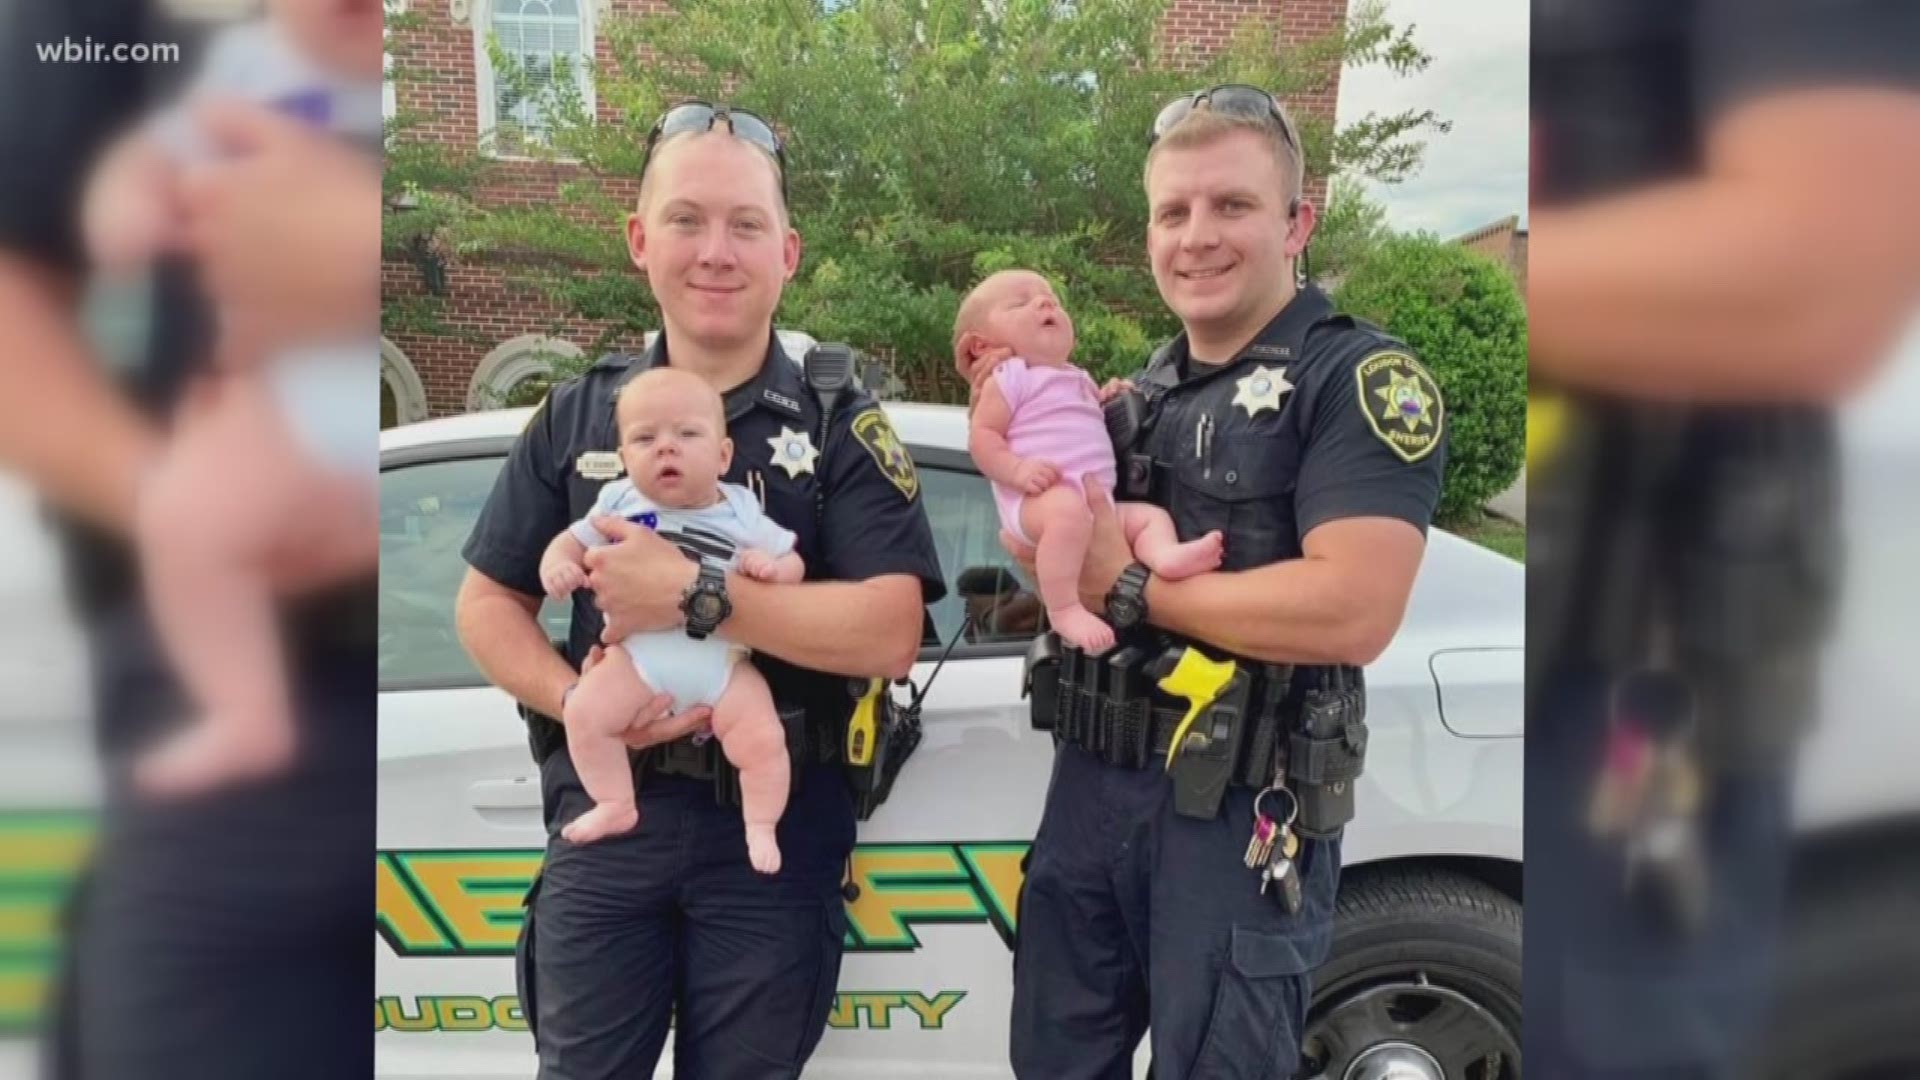 Loudon County Sheriff's Office shared on their Facebook page a recent photo  Deputies Brandon Dishner and Cole Rogers showing off their new daughters. A big congratulations to these new pops. June 18, 2019-4pm.